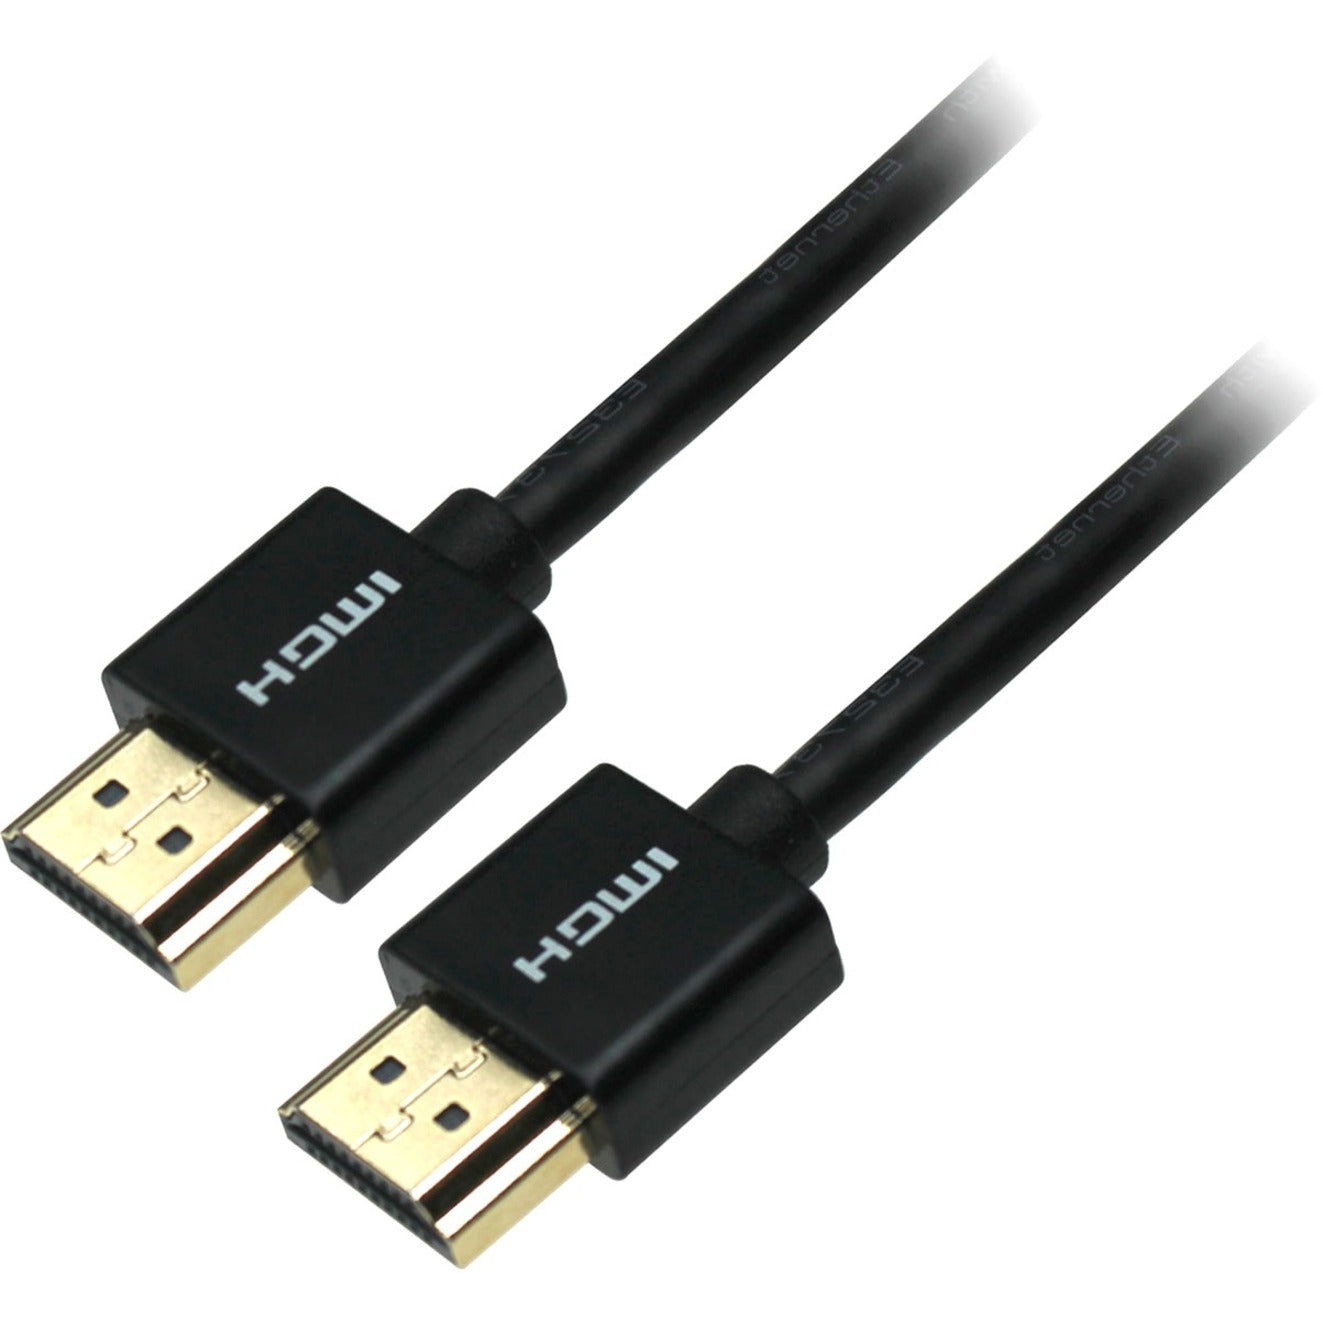 4XEM 4XSLIMHDMI5 5FT Ultra Slim 4K HDMI Cable, Passive, Flexible, Molded, Gold Plated, 18 Gbit/s Data Transfer Rate, 3840 x 2160 Supported Resolution